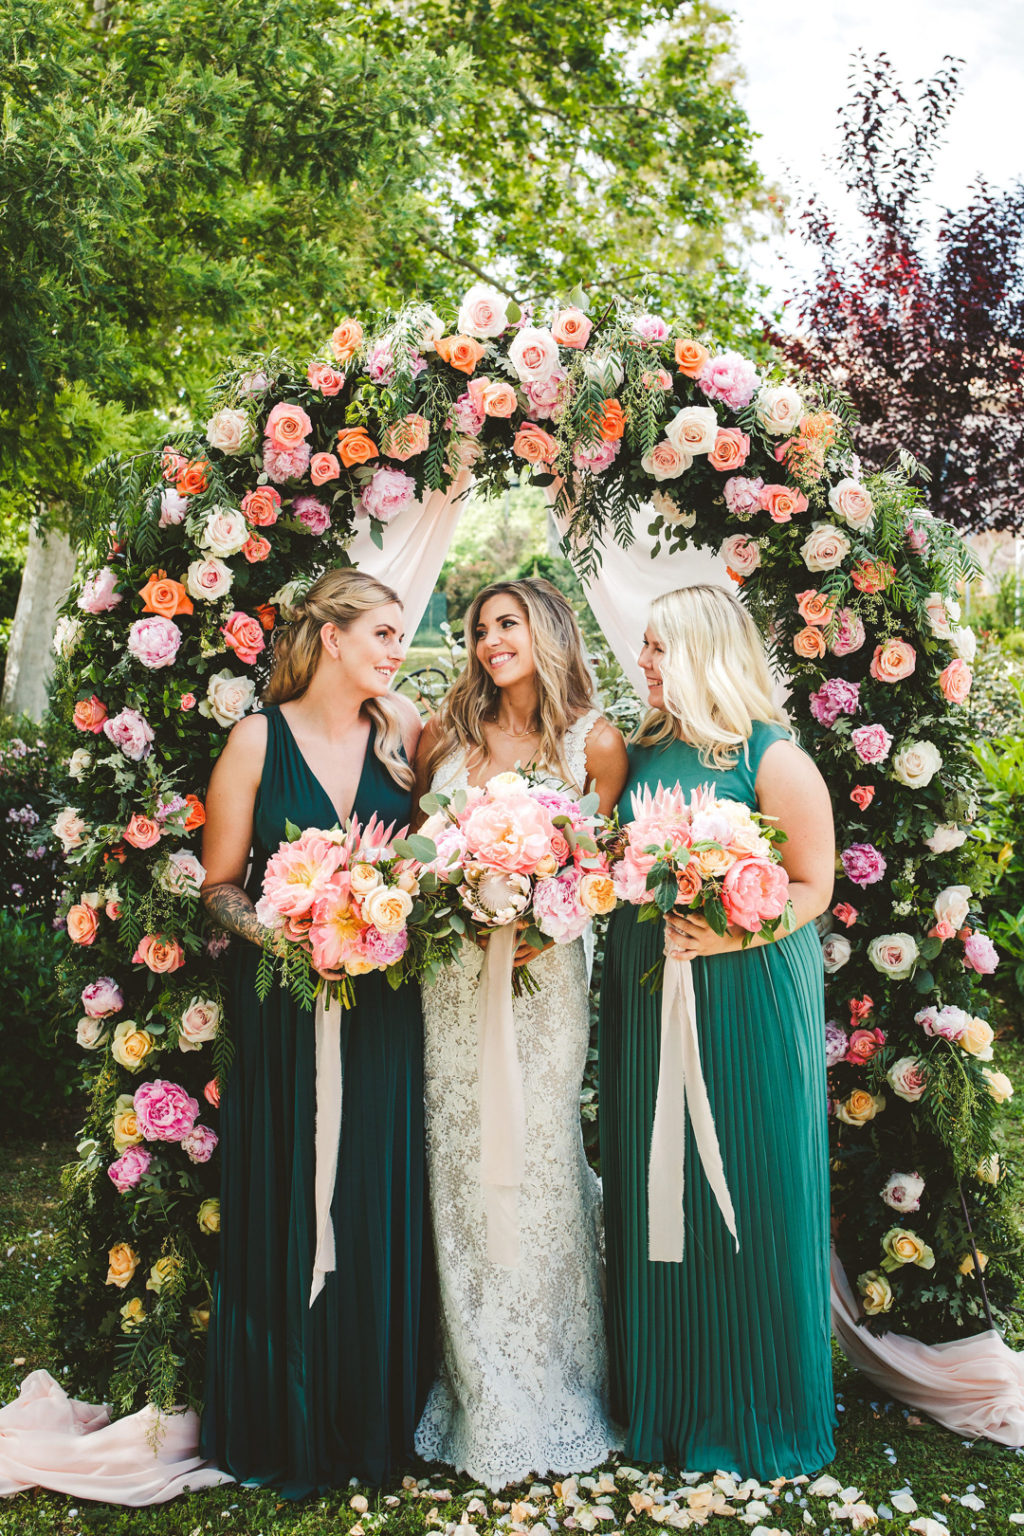 The wedding arch was decorated with greenery and bold and blush blooms all over